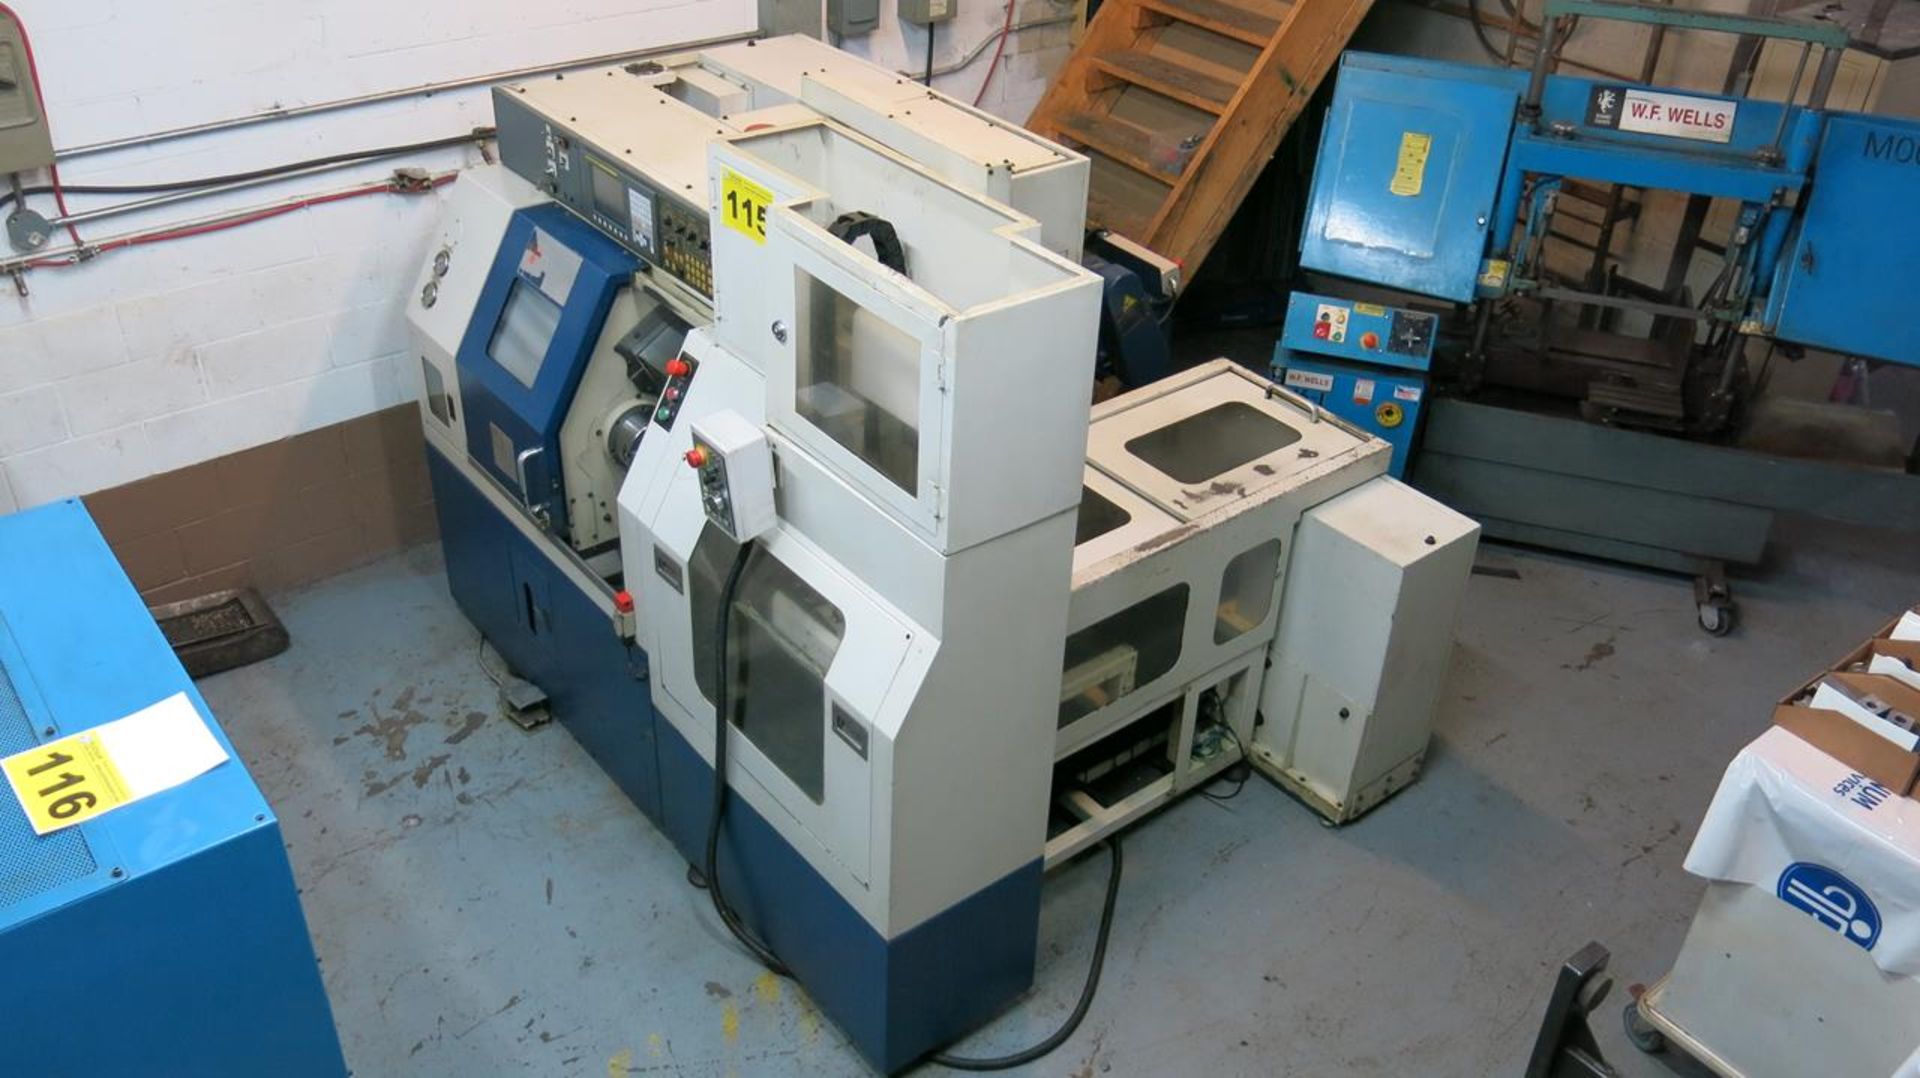 2012, TONGTAI MACHINE CO., HS-22, CNC PRECISION LATHE, 15 HP SPINDLE, 6000 RPM SPINDLE, 6" DIA 3 JAW - Image 2 of 9